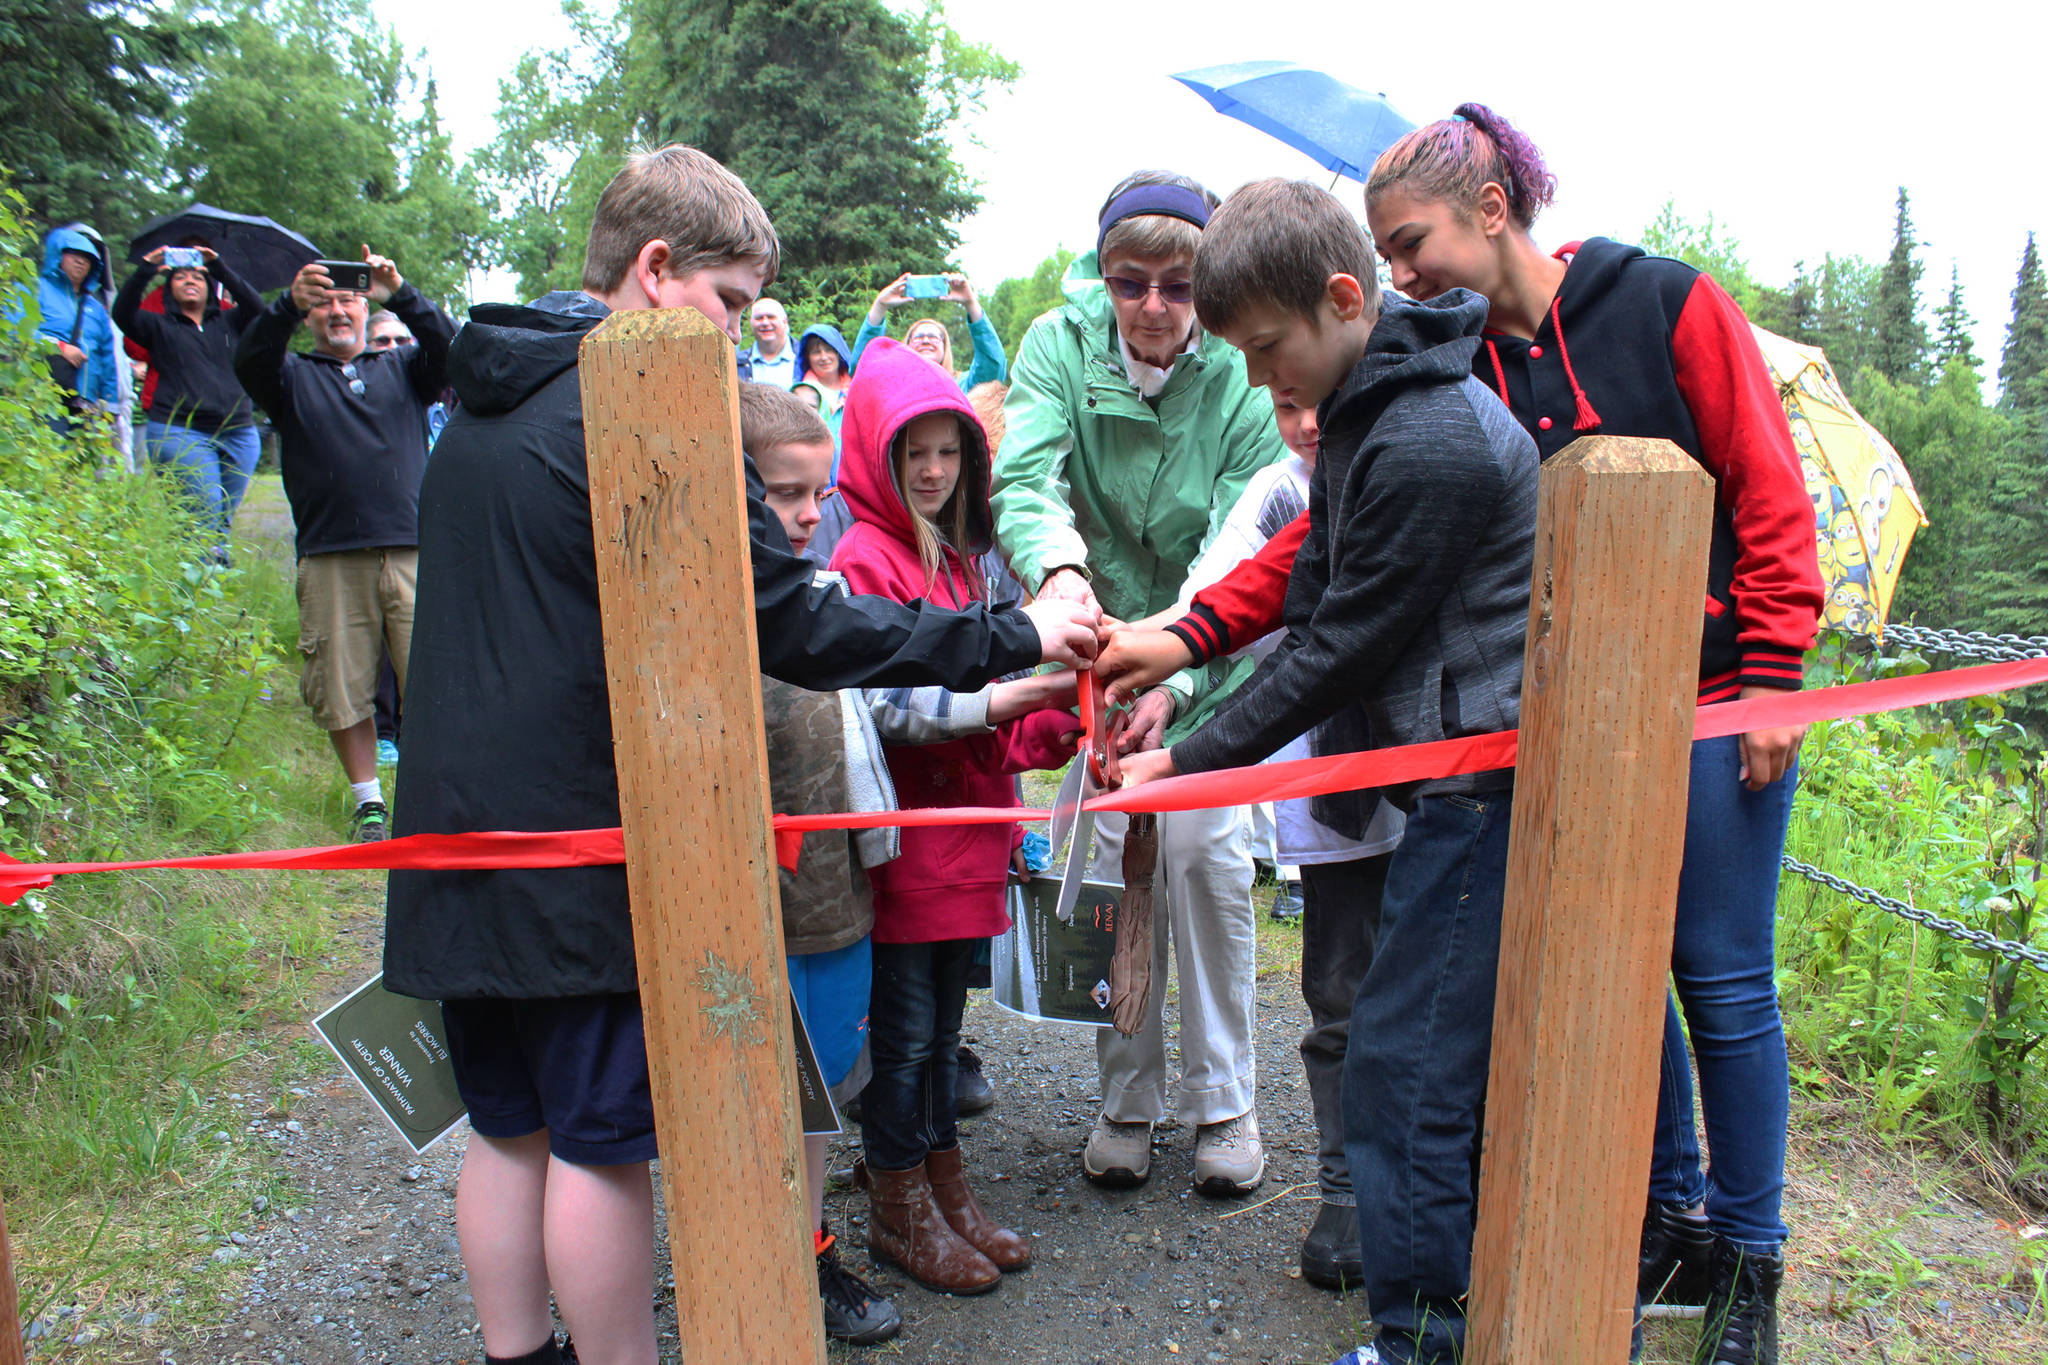 The winners of the Pathways of Poetry contest cut a ribbon opening a celebratory walk down the trail where their poems are displayed on signs Saturday, July 1, 2017 at Kenai Municipal Park in Kenai, Alaska. A panel of judges chose 12 winners out of 86 student participants, who submitted poems about nature. Scanning the codes on the signs brings up a recording of the authors reading their pieces. (Photo by Megan Pacer/Peninsula Clarion)